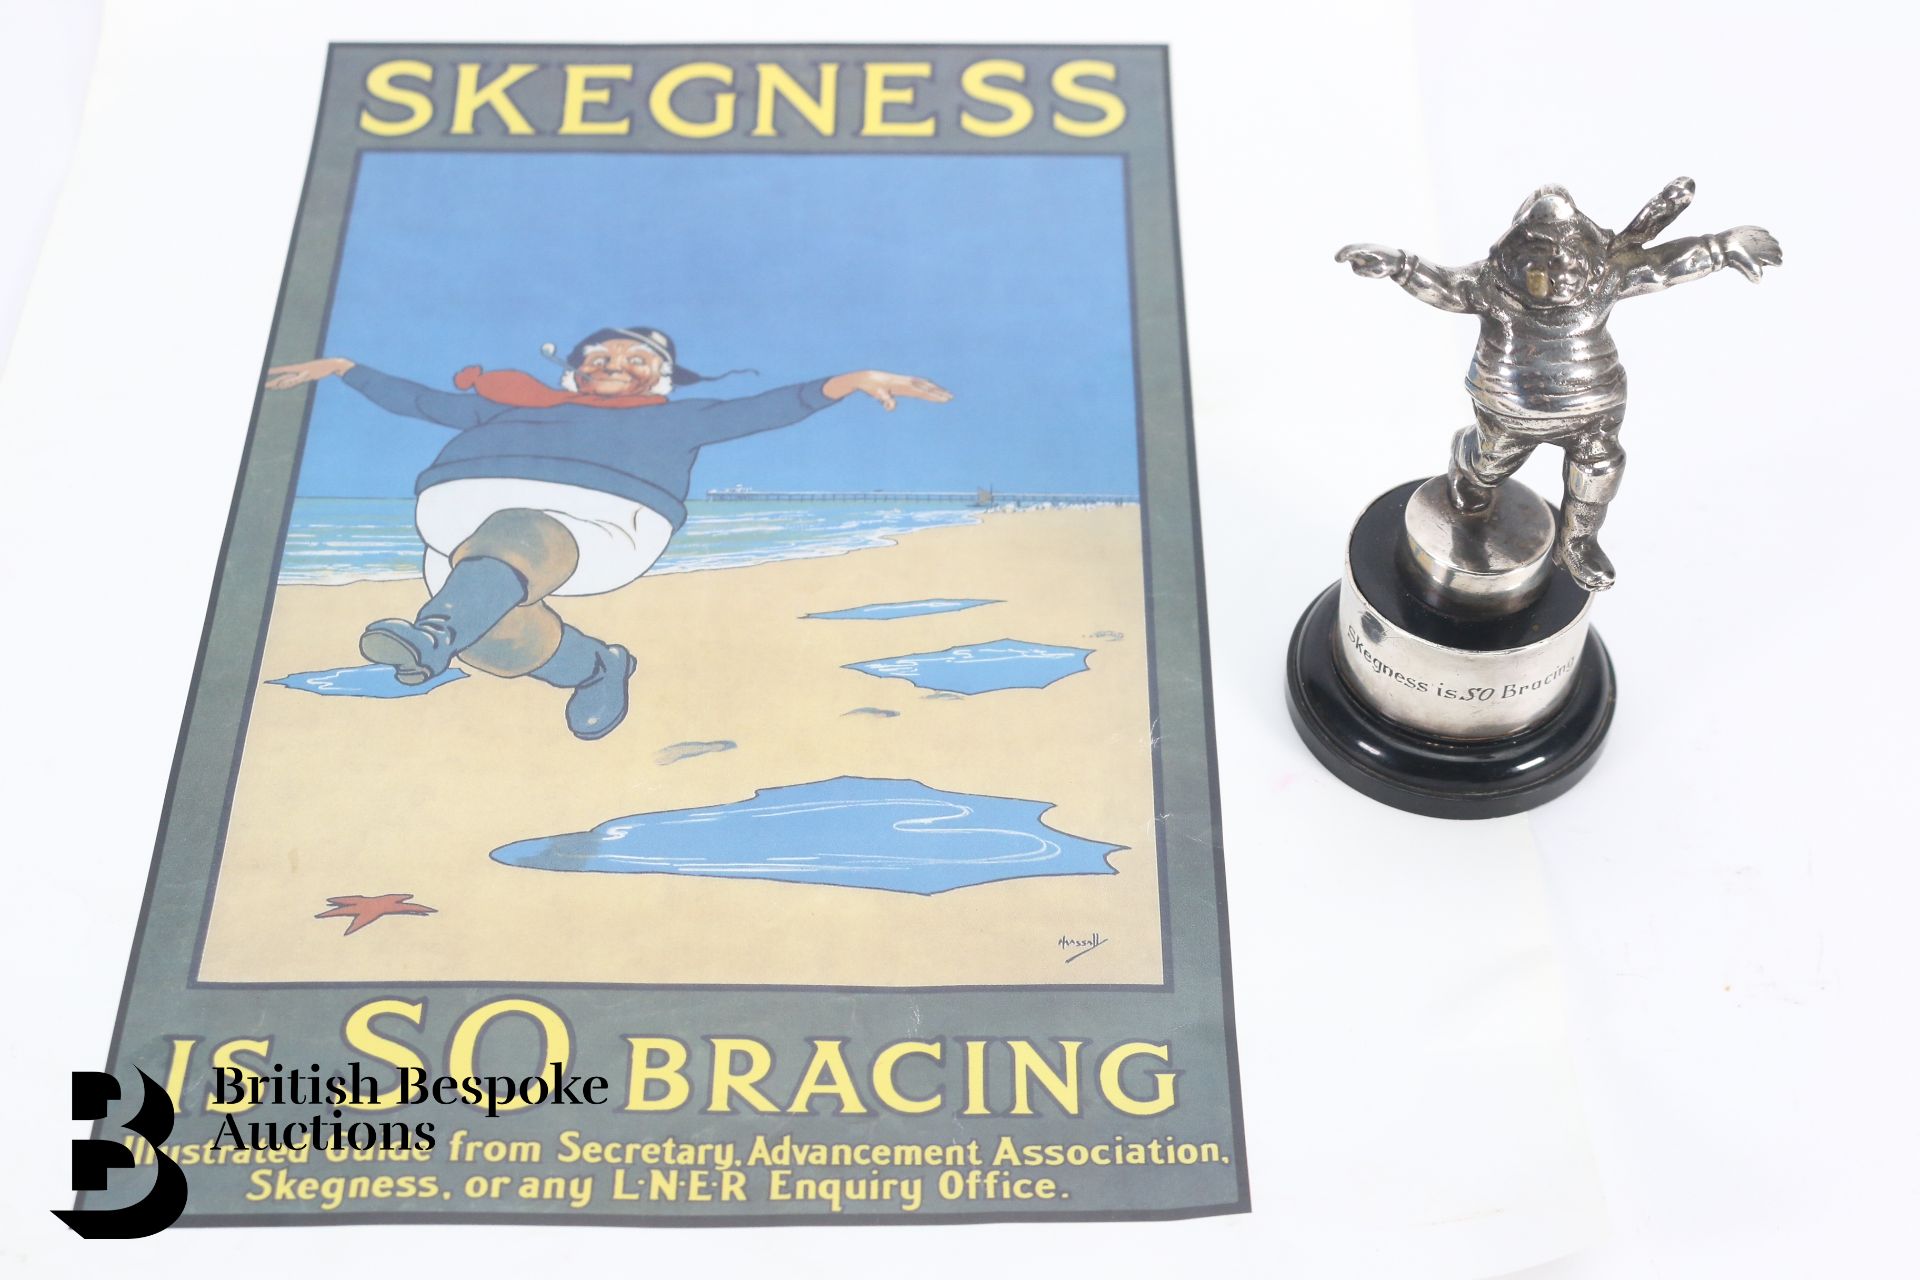 Mr Skegness Accessory Mascot and Poster